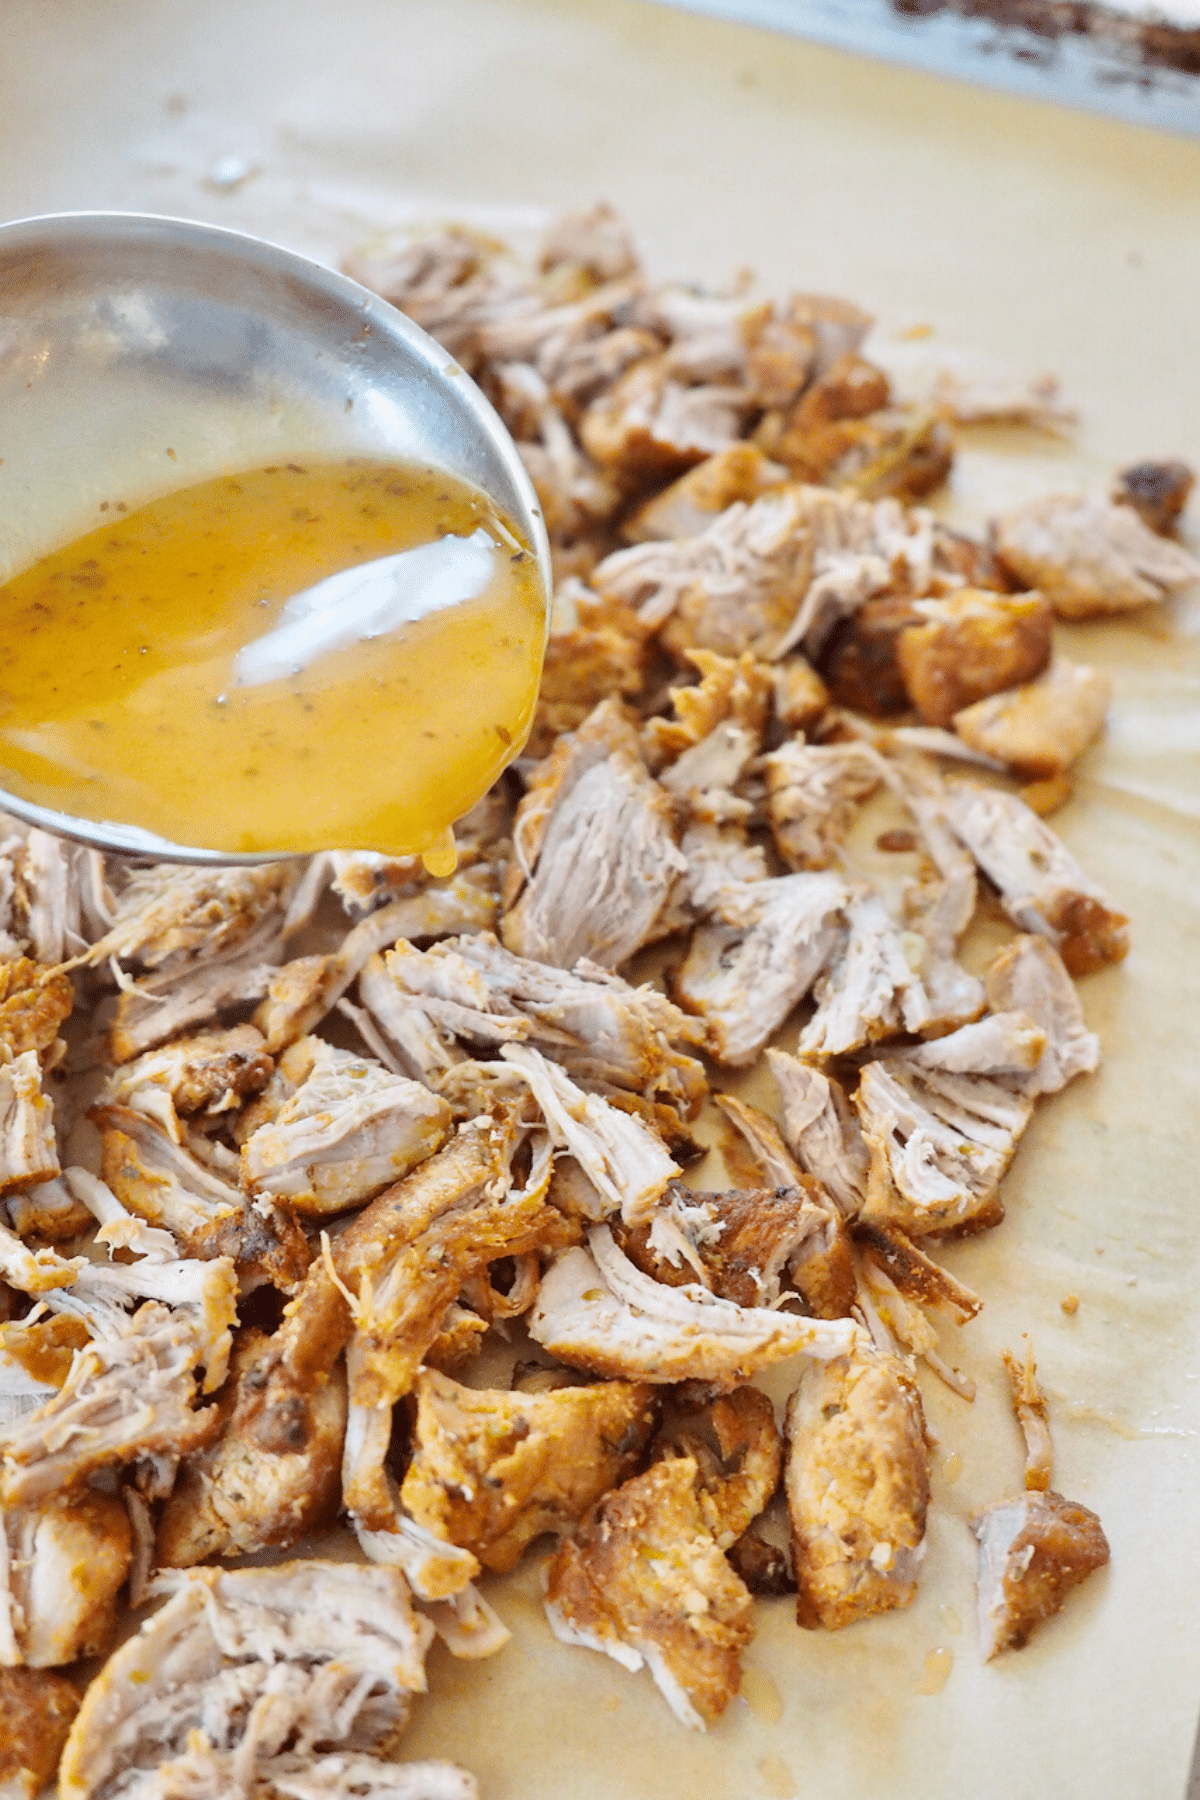 Pouring cooking juices over shredded carnitas on pan.